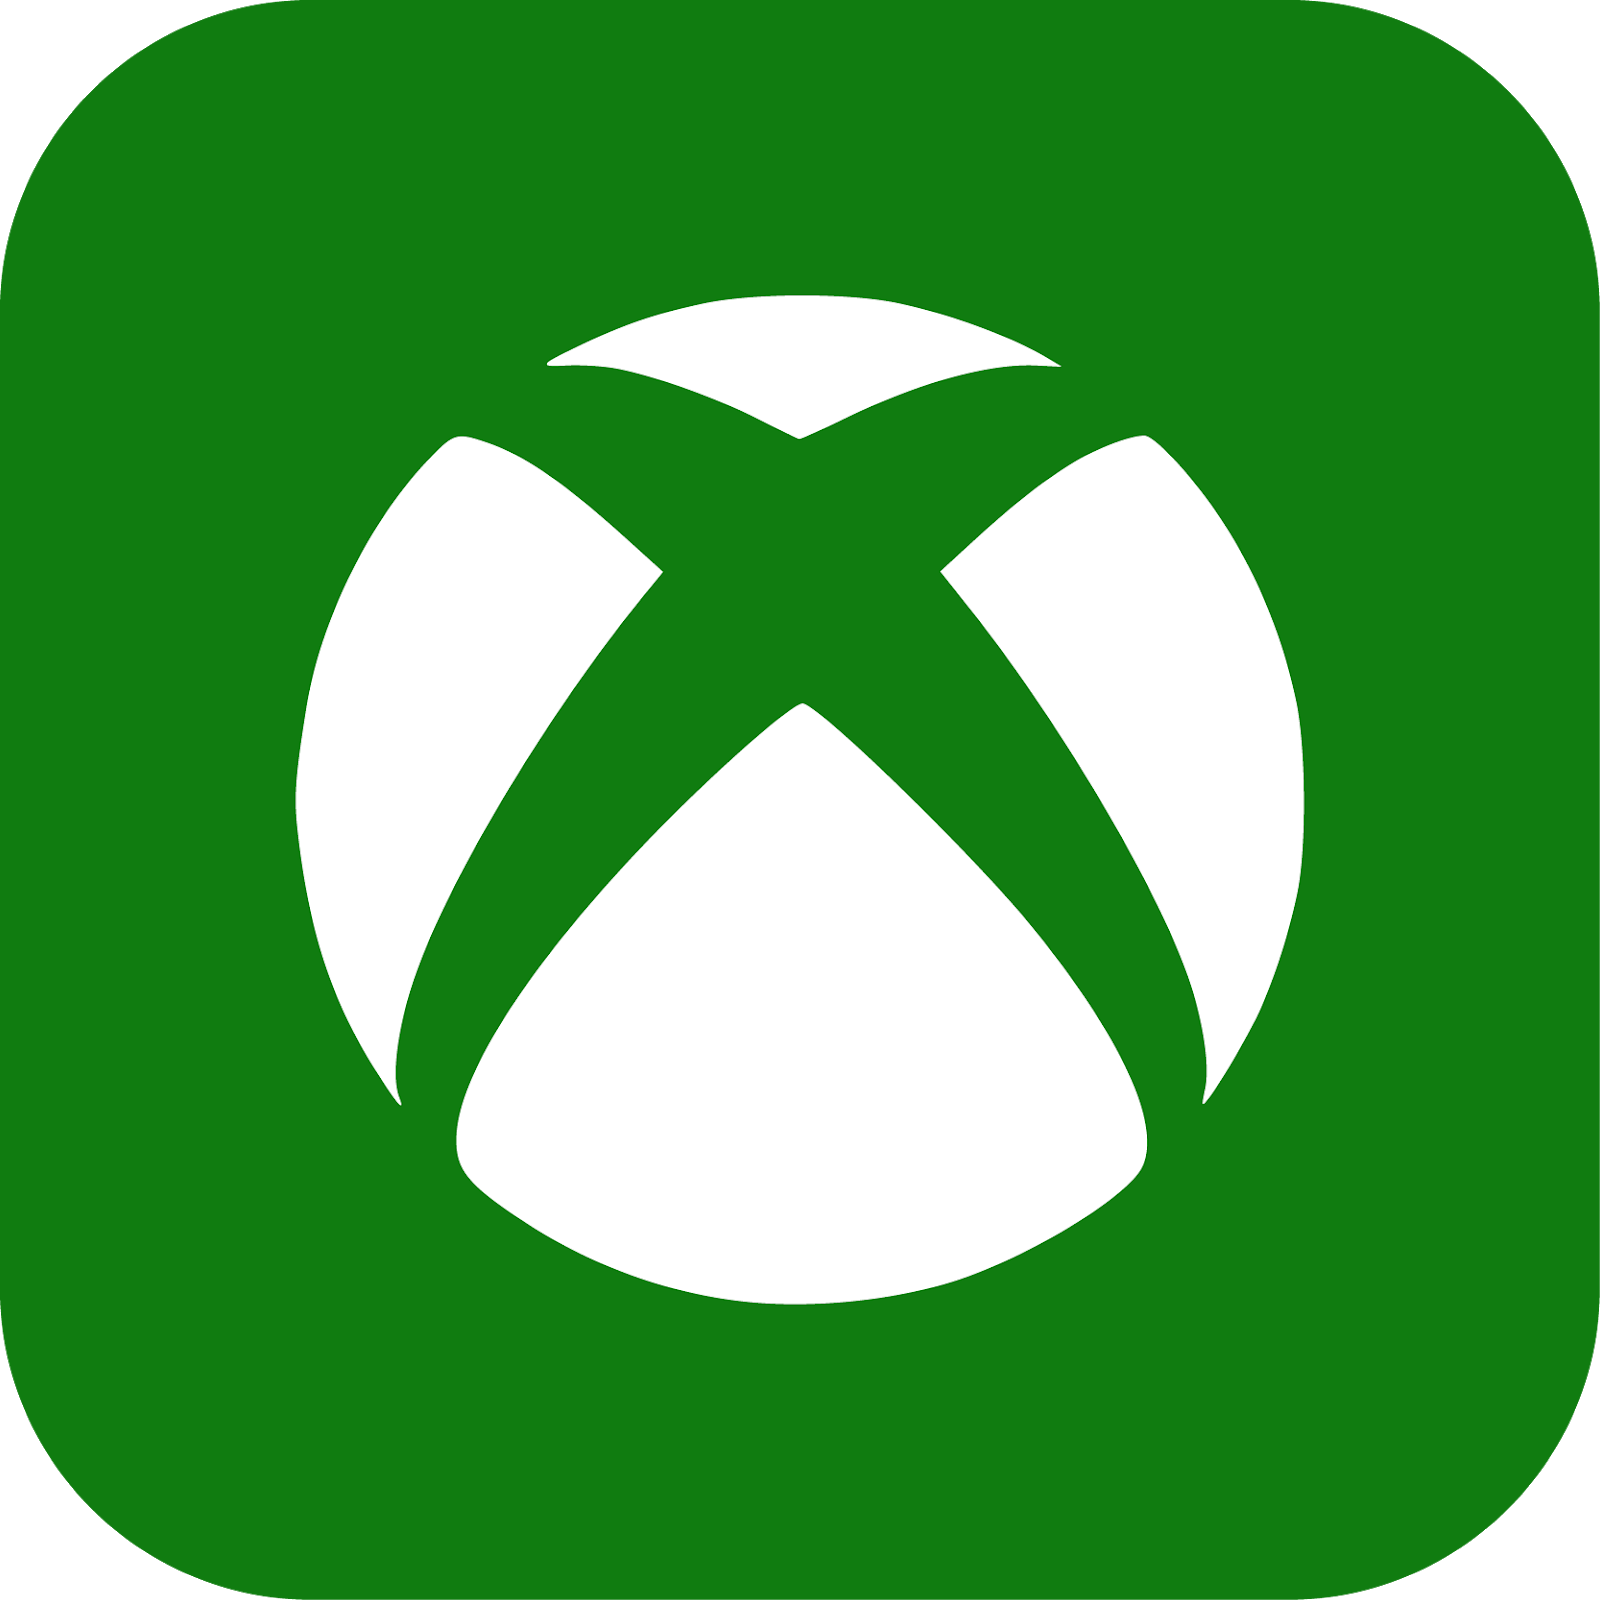 Xbox Logo Vector Png - Free download microsoft xbox current logo in